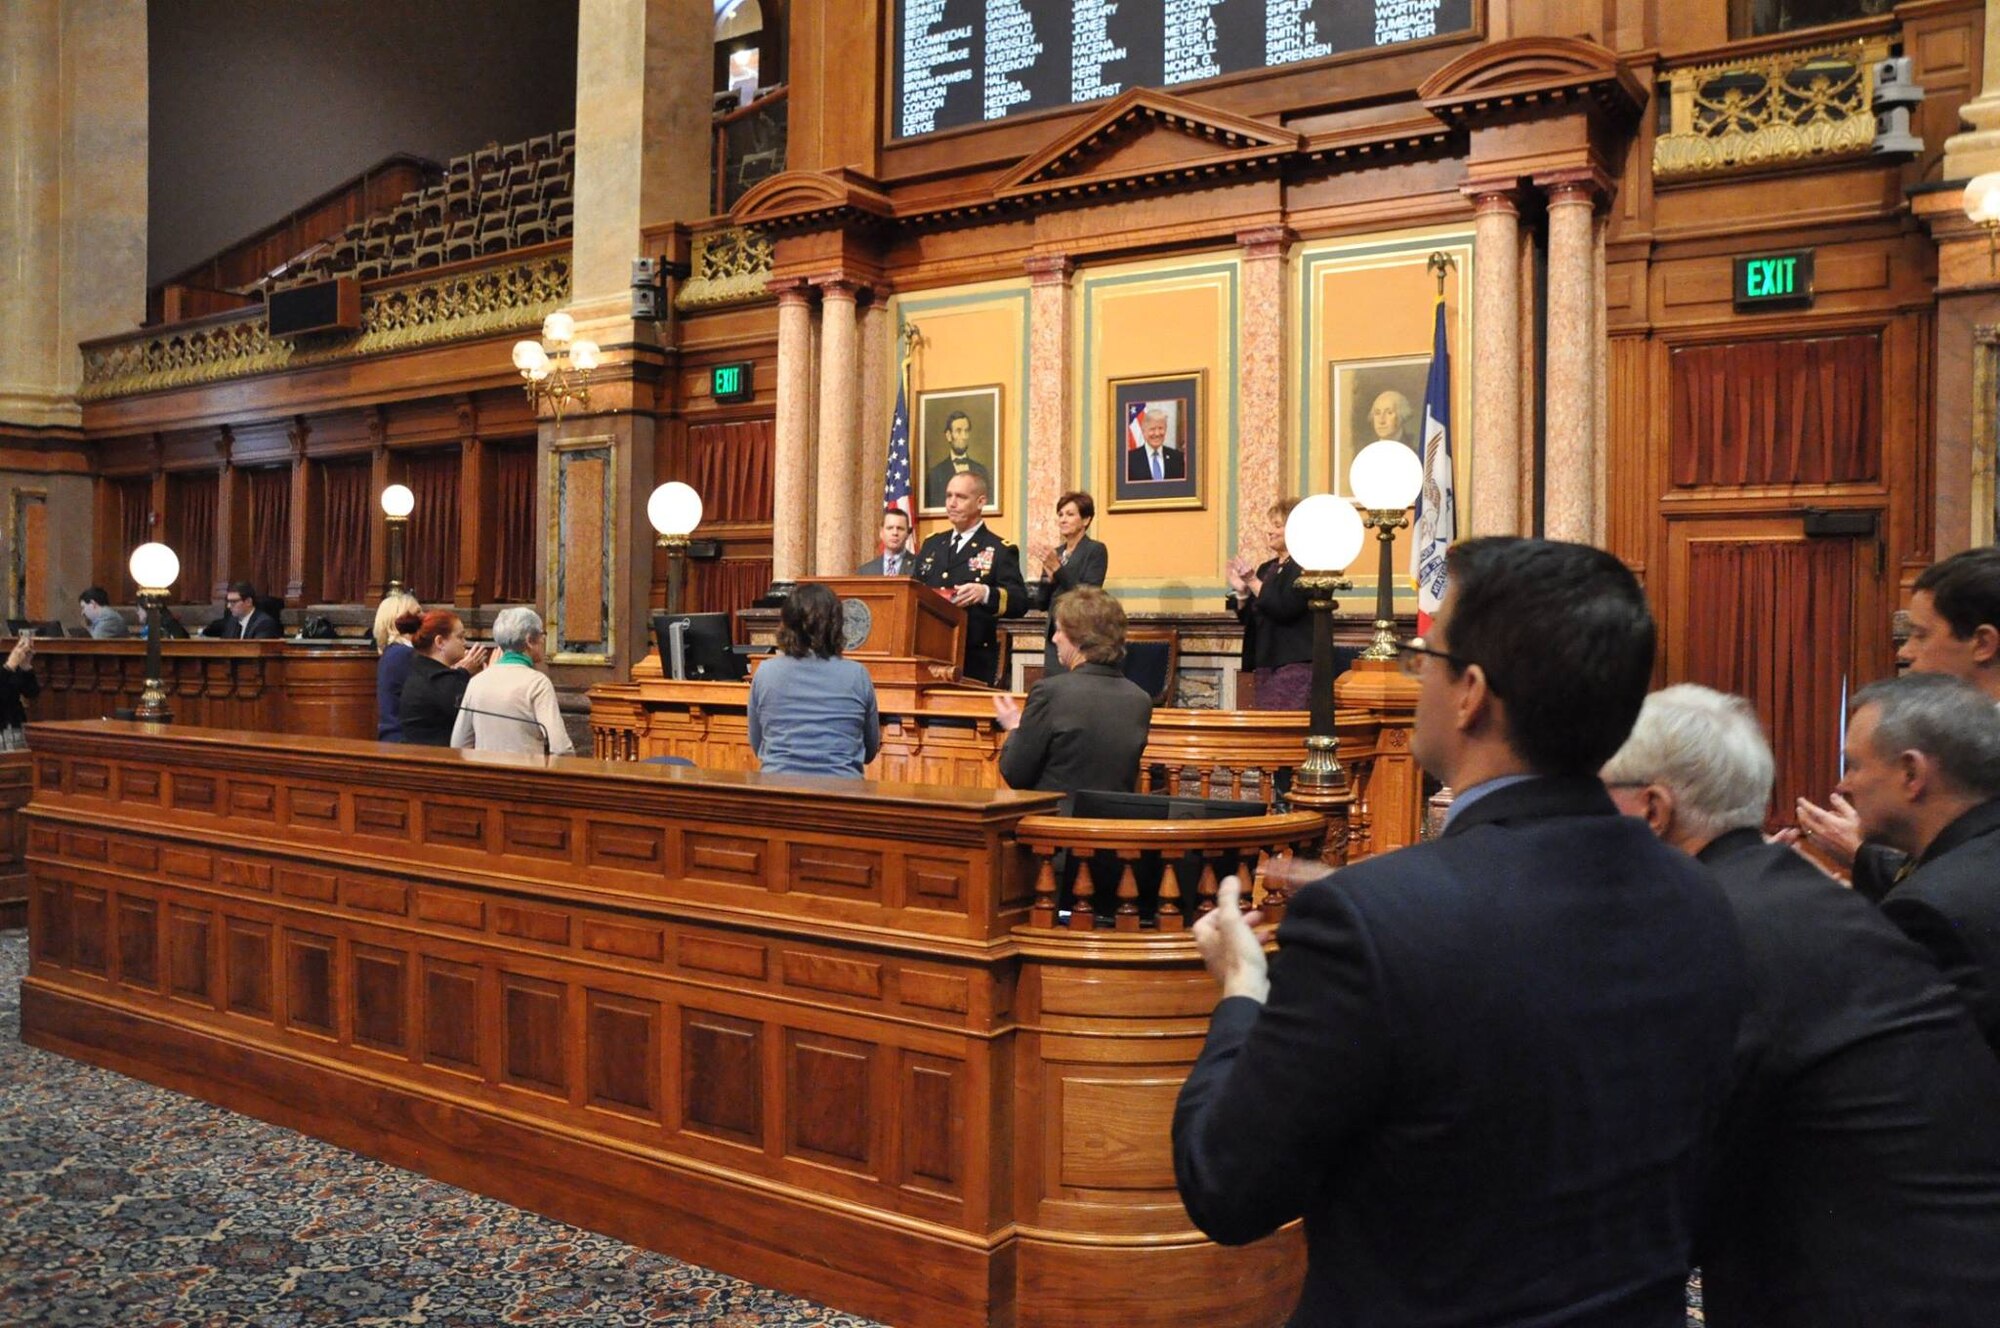 Maj. Gen. Timothy E. Orr, The Adjutant General for the Iowa National Guard, delivers his Condition of the Guard Address to the Eighty-Eighth General Assembly at the Iowa State Capitol on January 17th, 2019. The purpose of this assembly was to inform the representatives on the status of the Iowa National Guard, both Army and Air. (Iowa National Guard photo by Lt. Col. Timothy Mills)